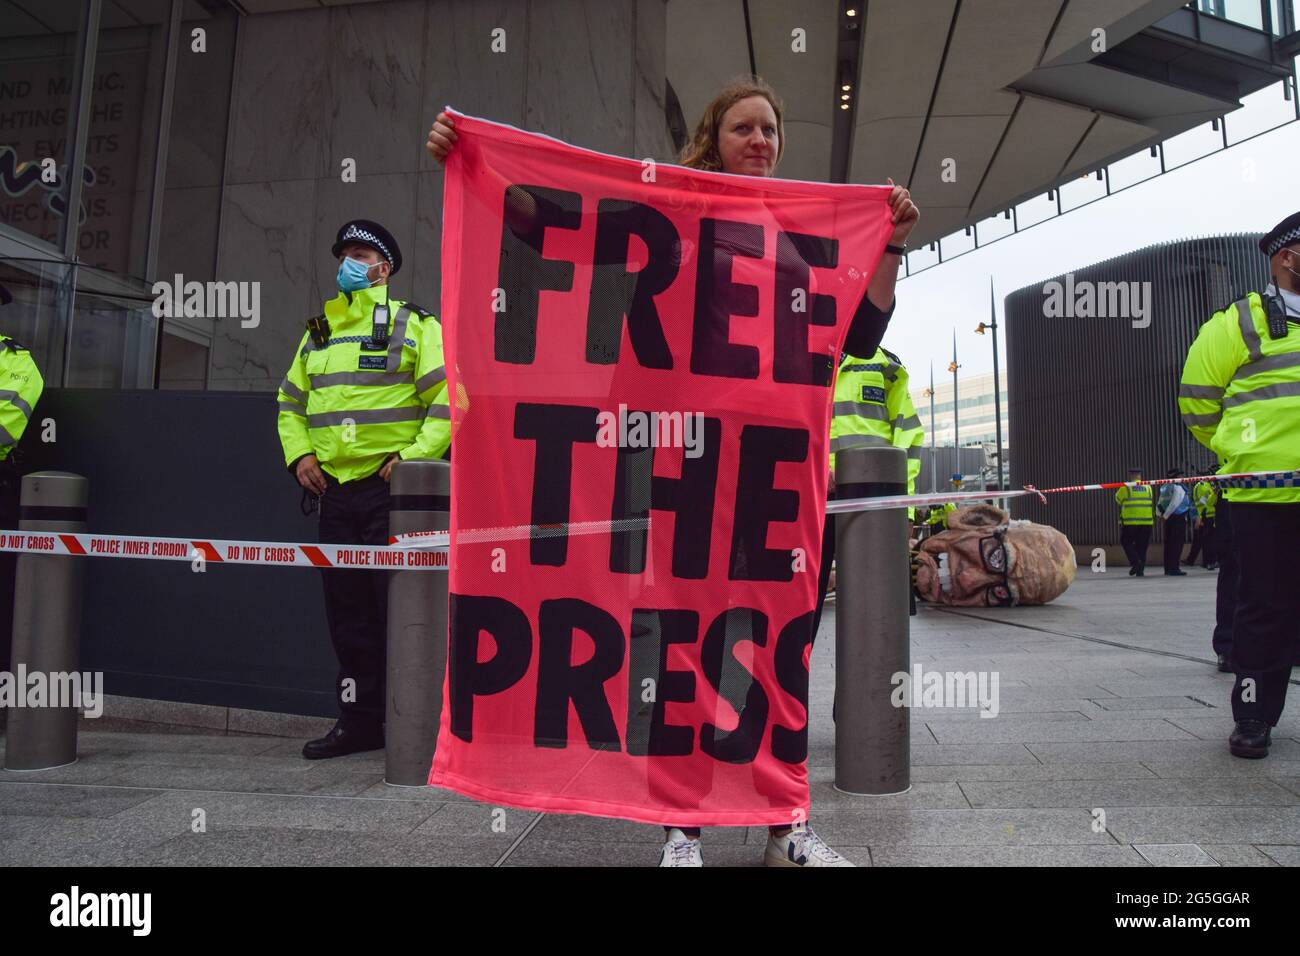 London, United Kingdom. 27th June 2021. A demonstrator outside News UK during the Free The Press protest. Extinction Rebellion demonstrators marched from Parliament Square to News UK headquarters, owned by Rupert Murdoch, in London Bridge, in protest of misinformation, corruption, and the inaccurate and insufficient coverage of the climate crisis by Murdoch's newspapers. (Credit: Vuk Valcic / Alamy Live News) Stock Photo